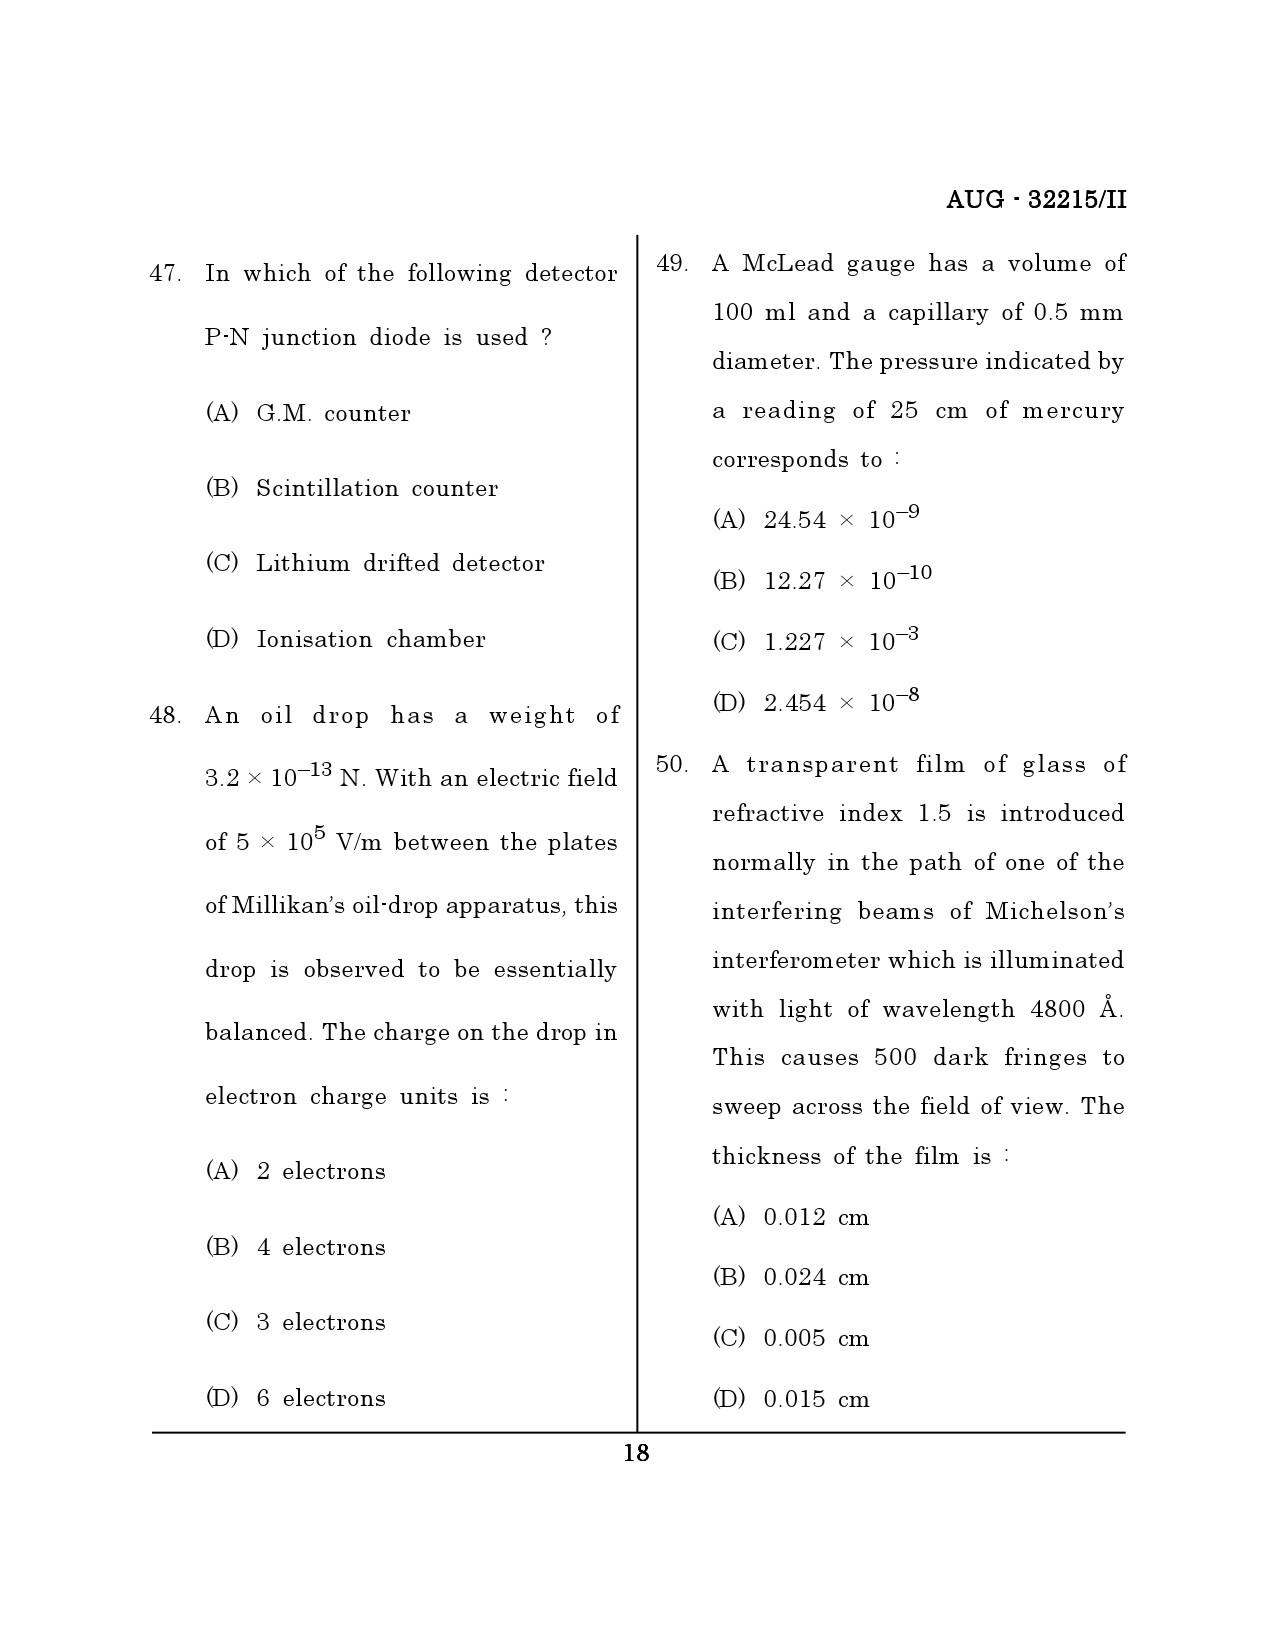 Maharashtra SET Physical Science Question Paper II August 2015 17